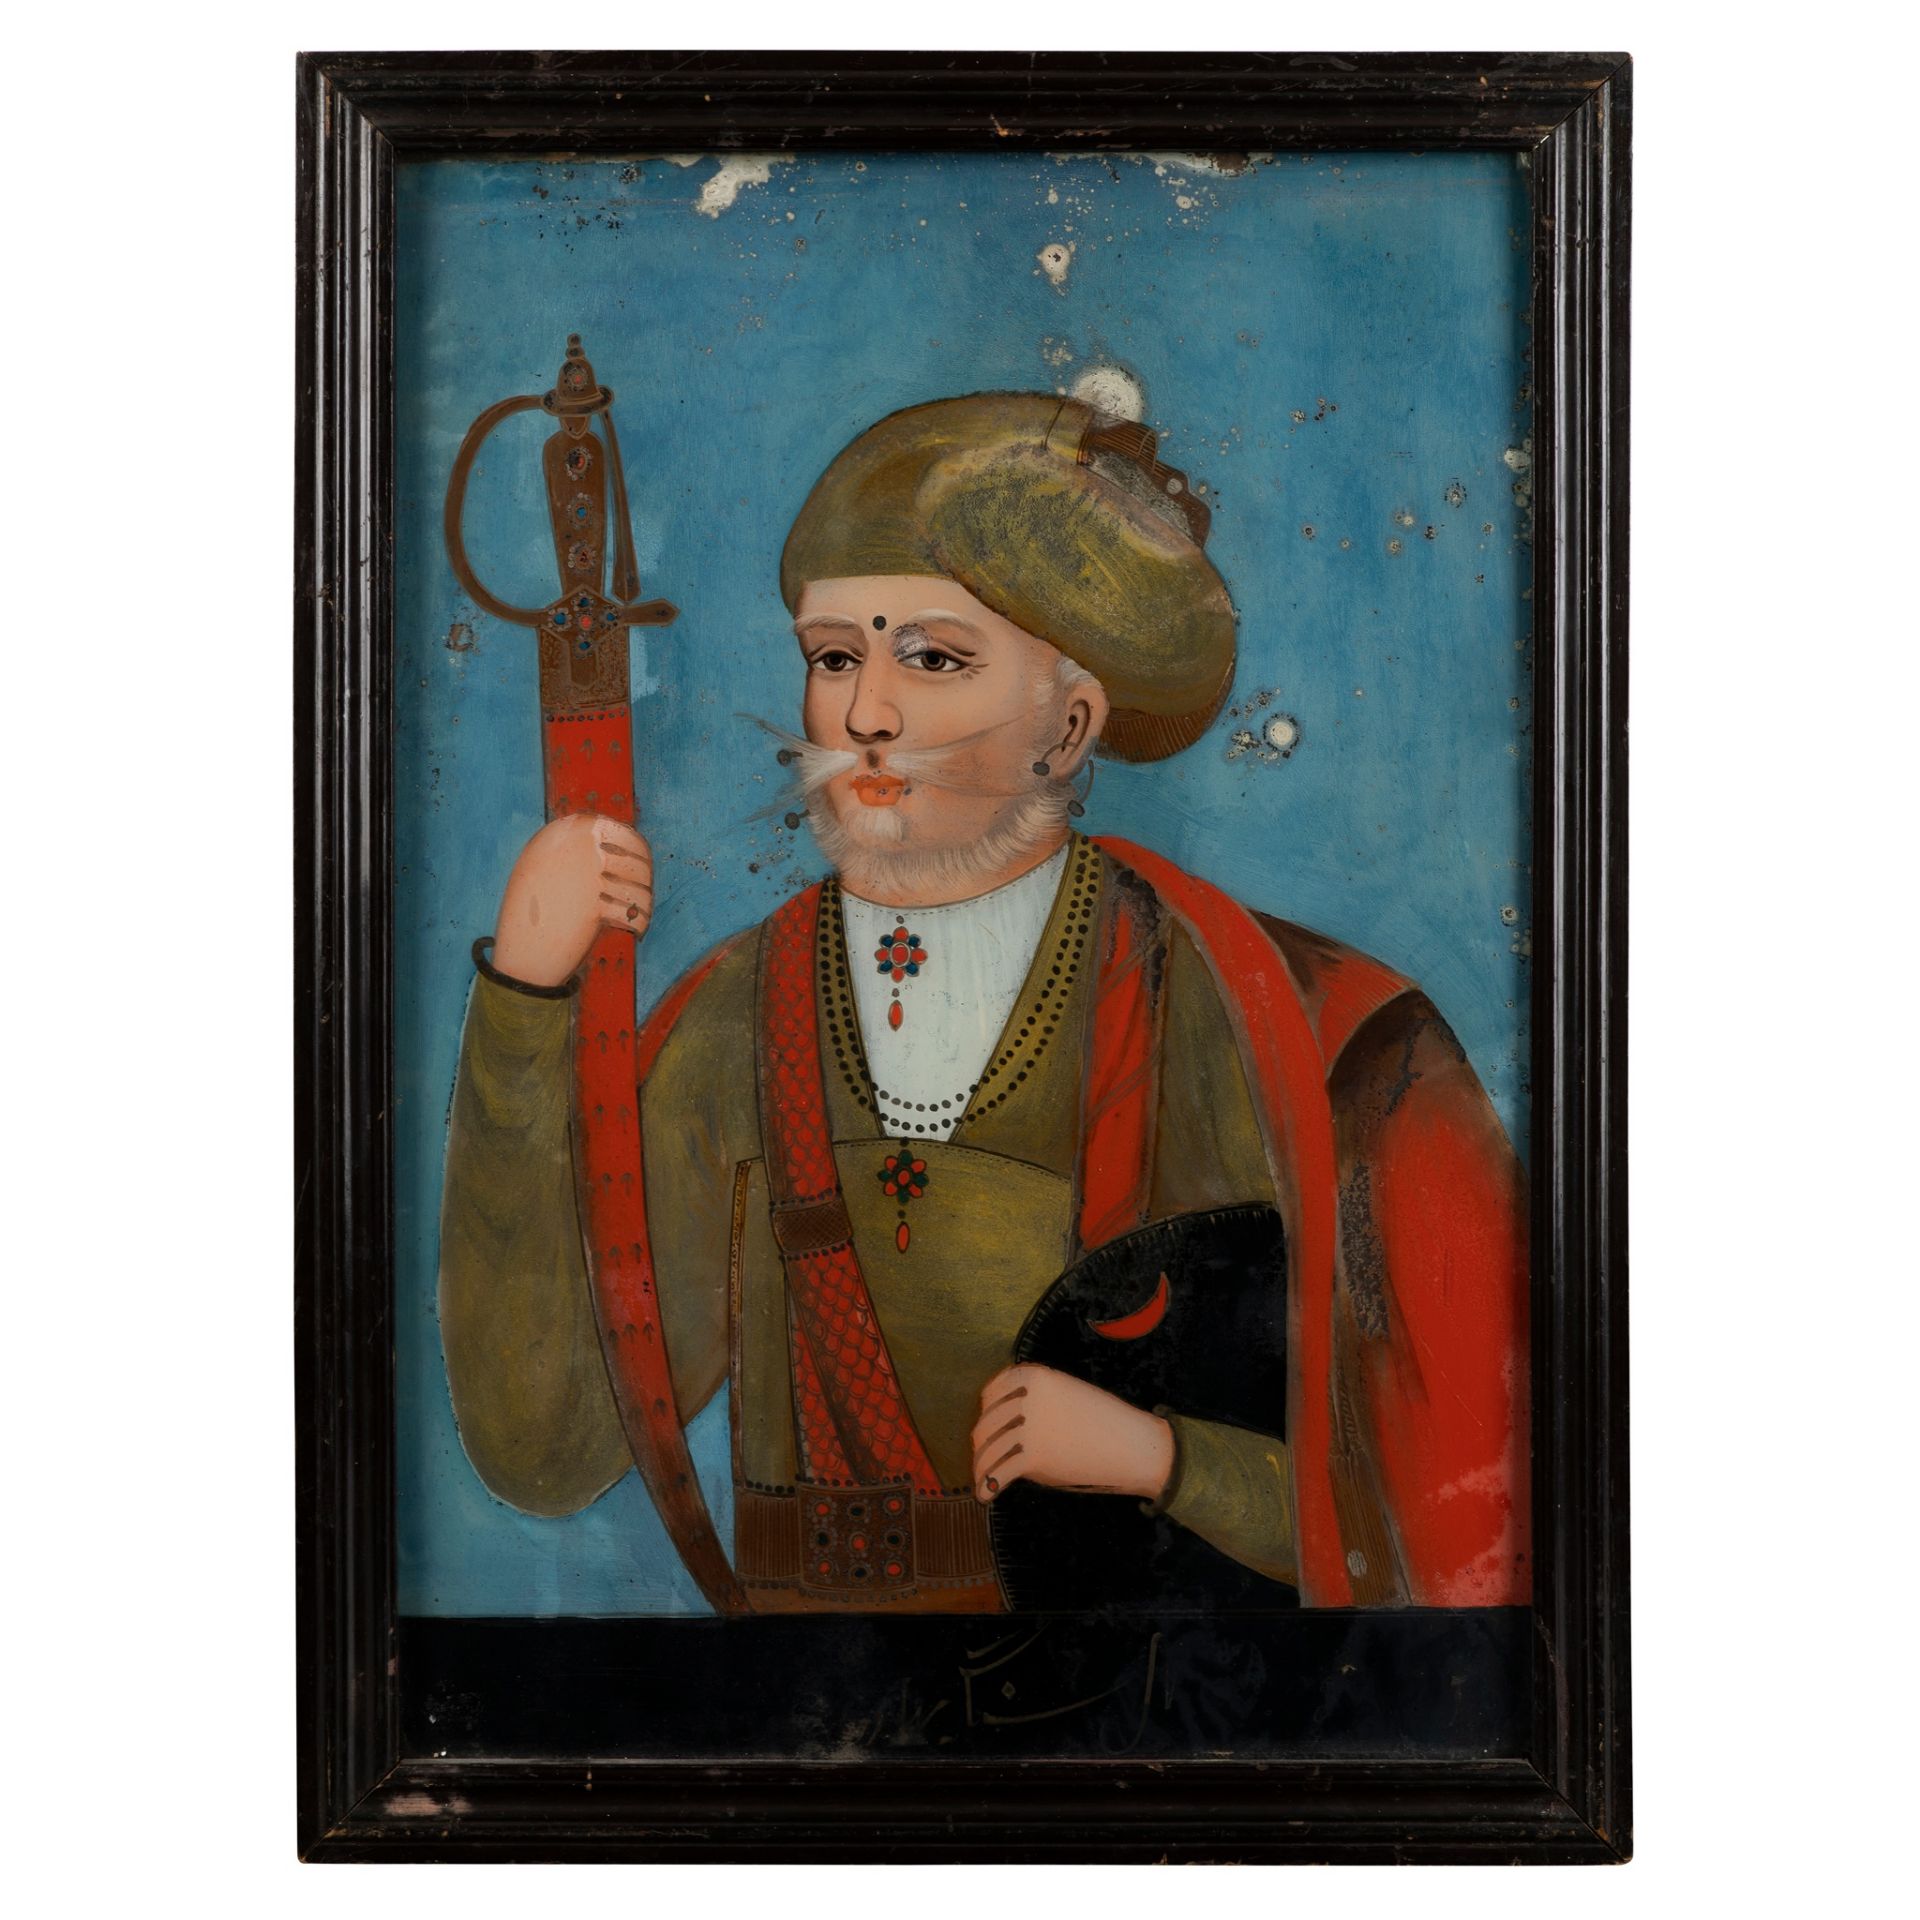 A REVERSE GLASS PAINTING DEPICTING A SIKH RULER INDIA, 19TH CENTURY